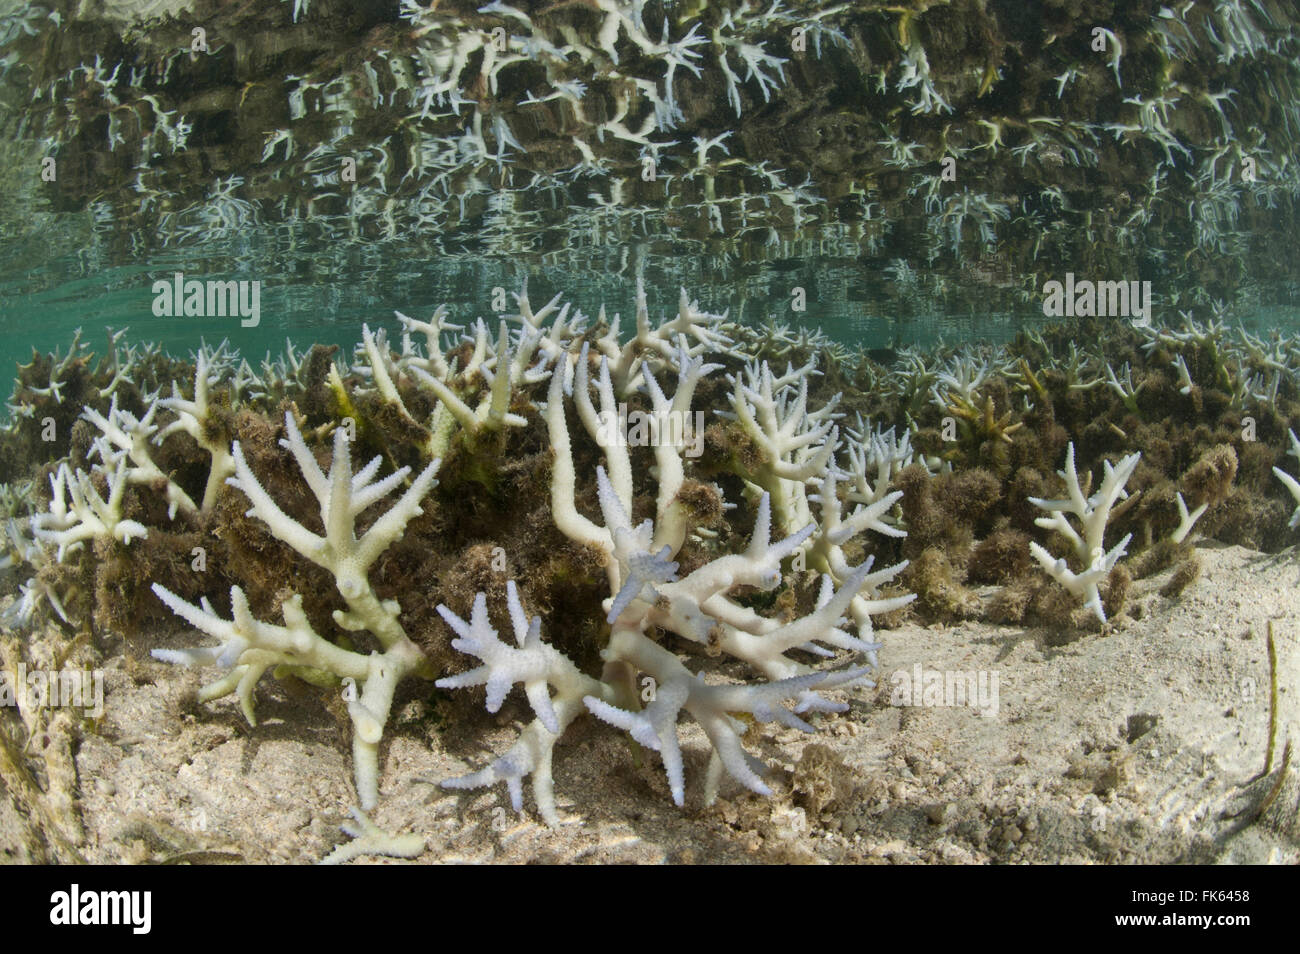 Shallow bleaching corals with its reflection in the water Stock Photo